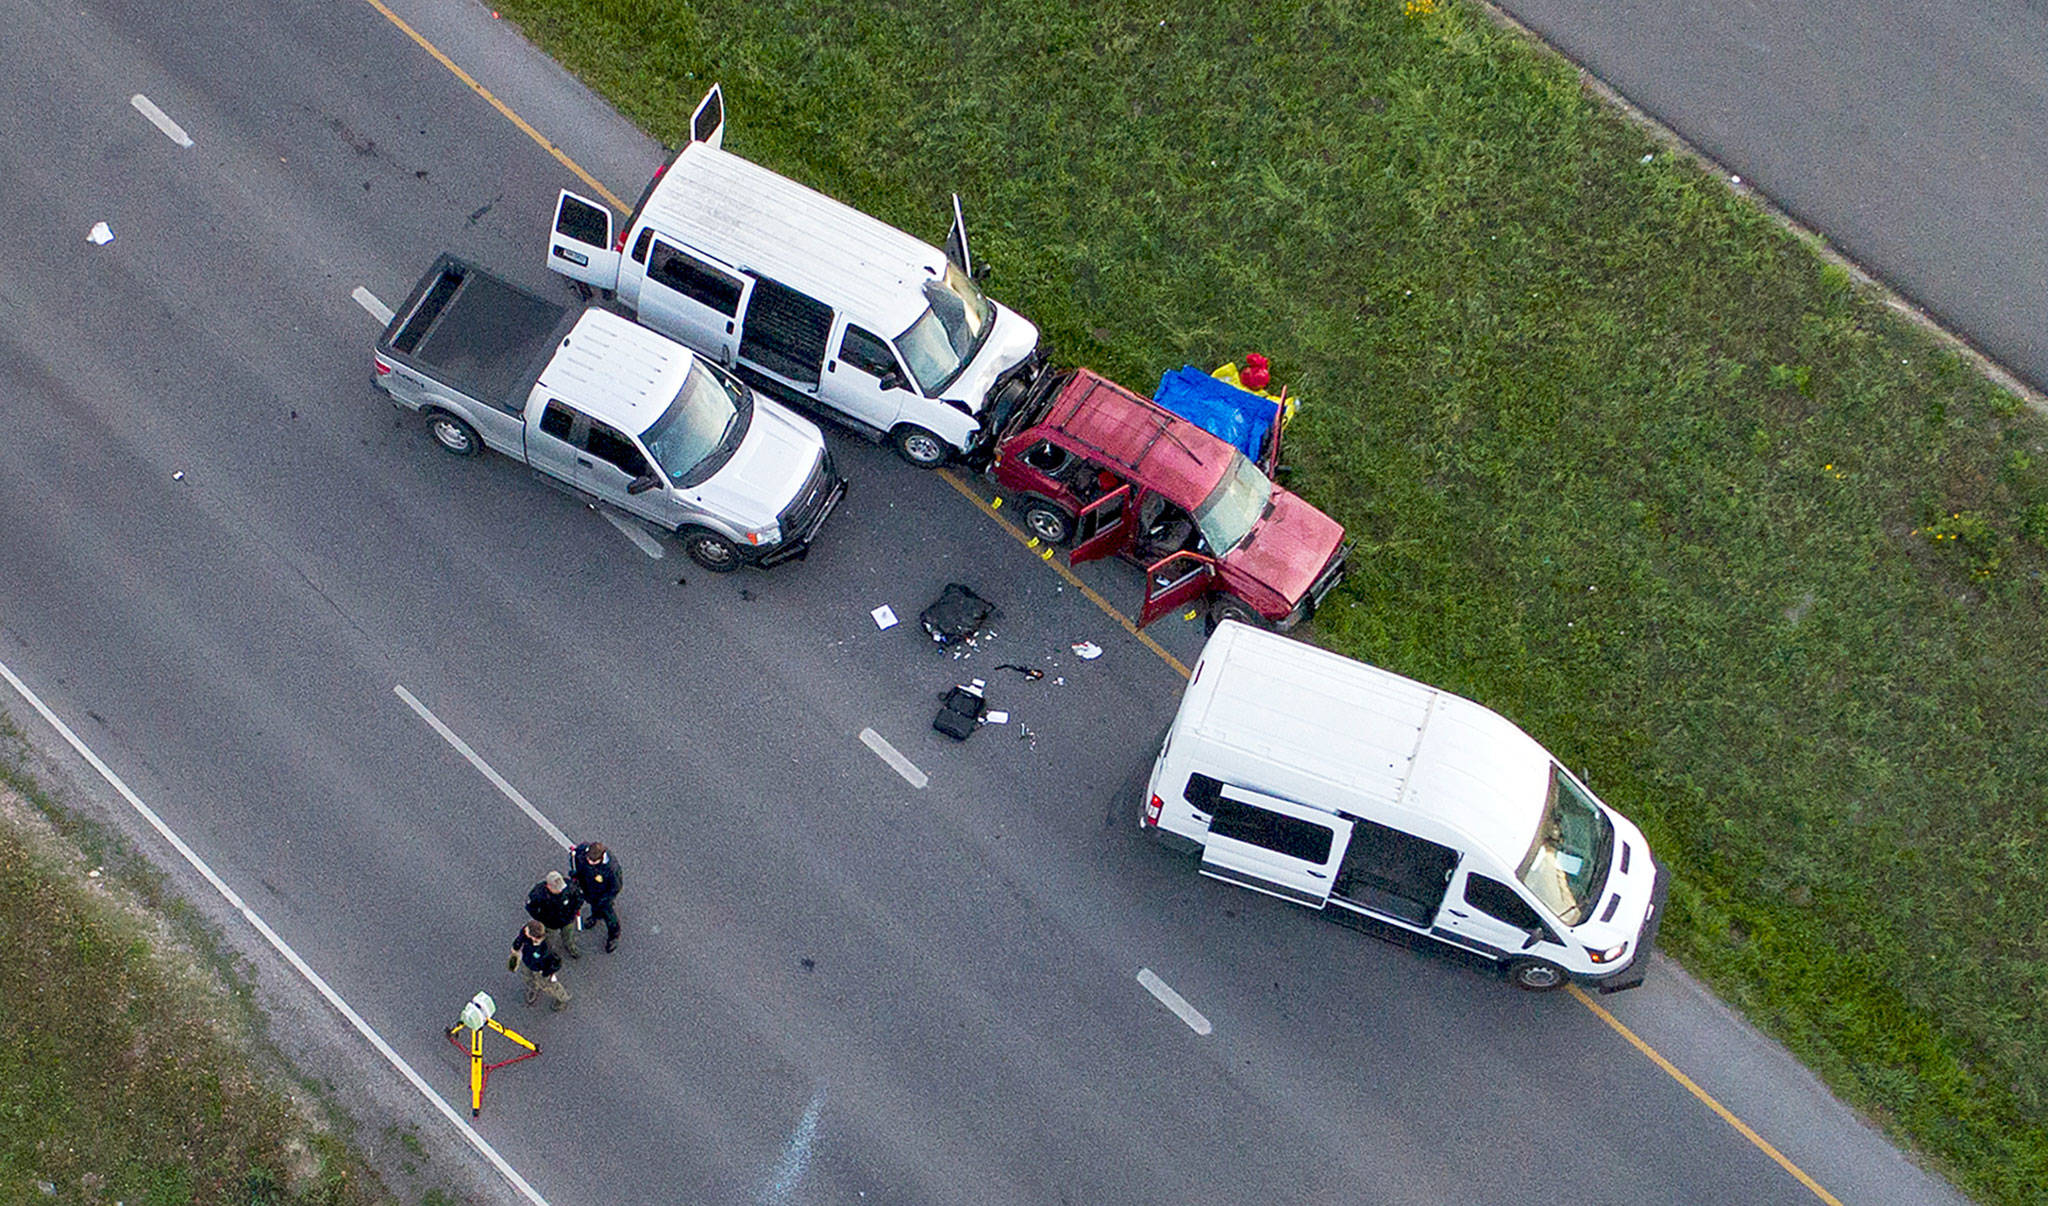 Officials investigate near a vehicle (center) in which the suspect in the deadly bombings that terrorized Austin blew himself up in Round Rock, Texas, on Wednesday. (Jay Janner/Austin American-Statesman via AP)